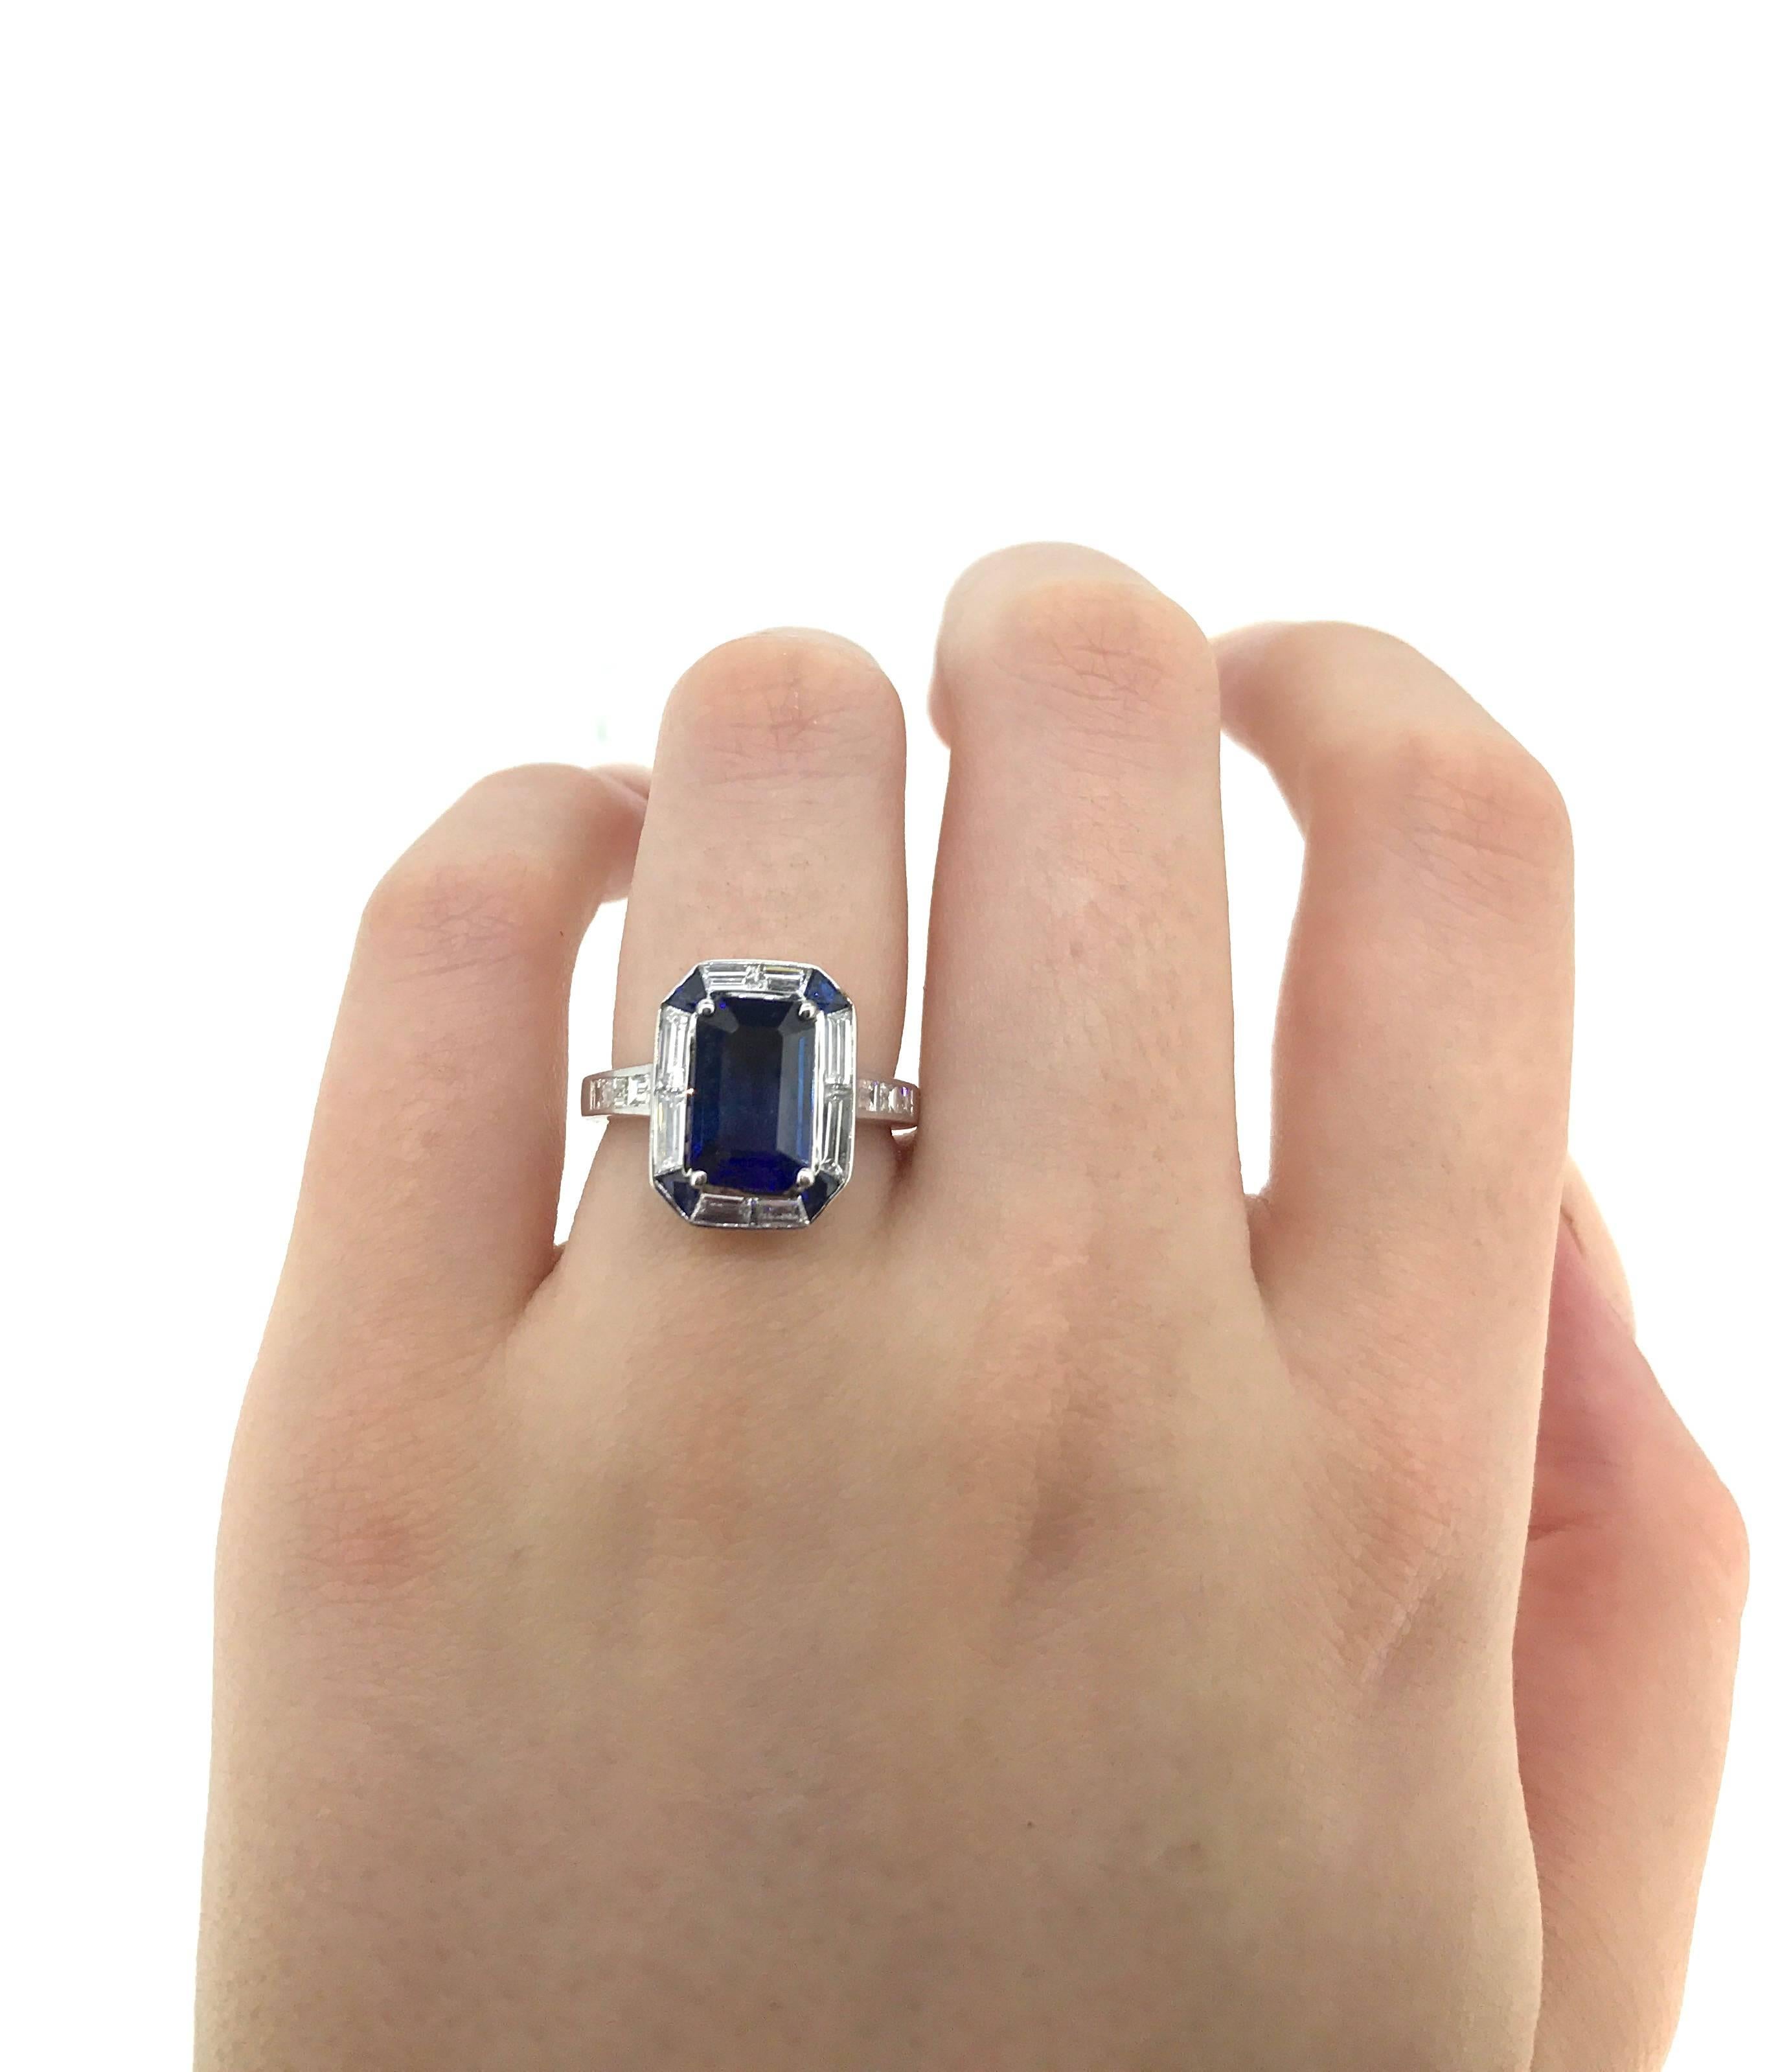 Featuring an 18K white gold modern Art Deco Style ring claw set with an Emerald cut Australian type blue Sapphire 2.53 carat (known weight) (10.21 mm x 6.61 mm x 3.39 mm) surrounded by 4x approx. 10pt. (2.6 mm - 1.3 mm.) trapezoid cut Australian